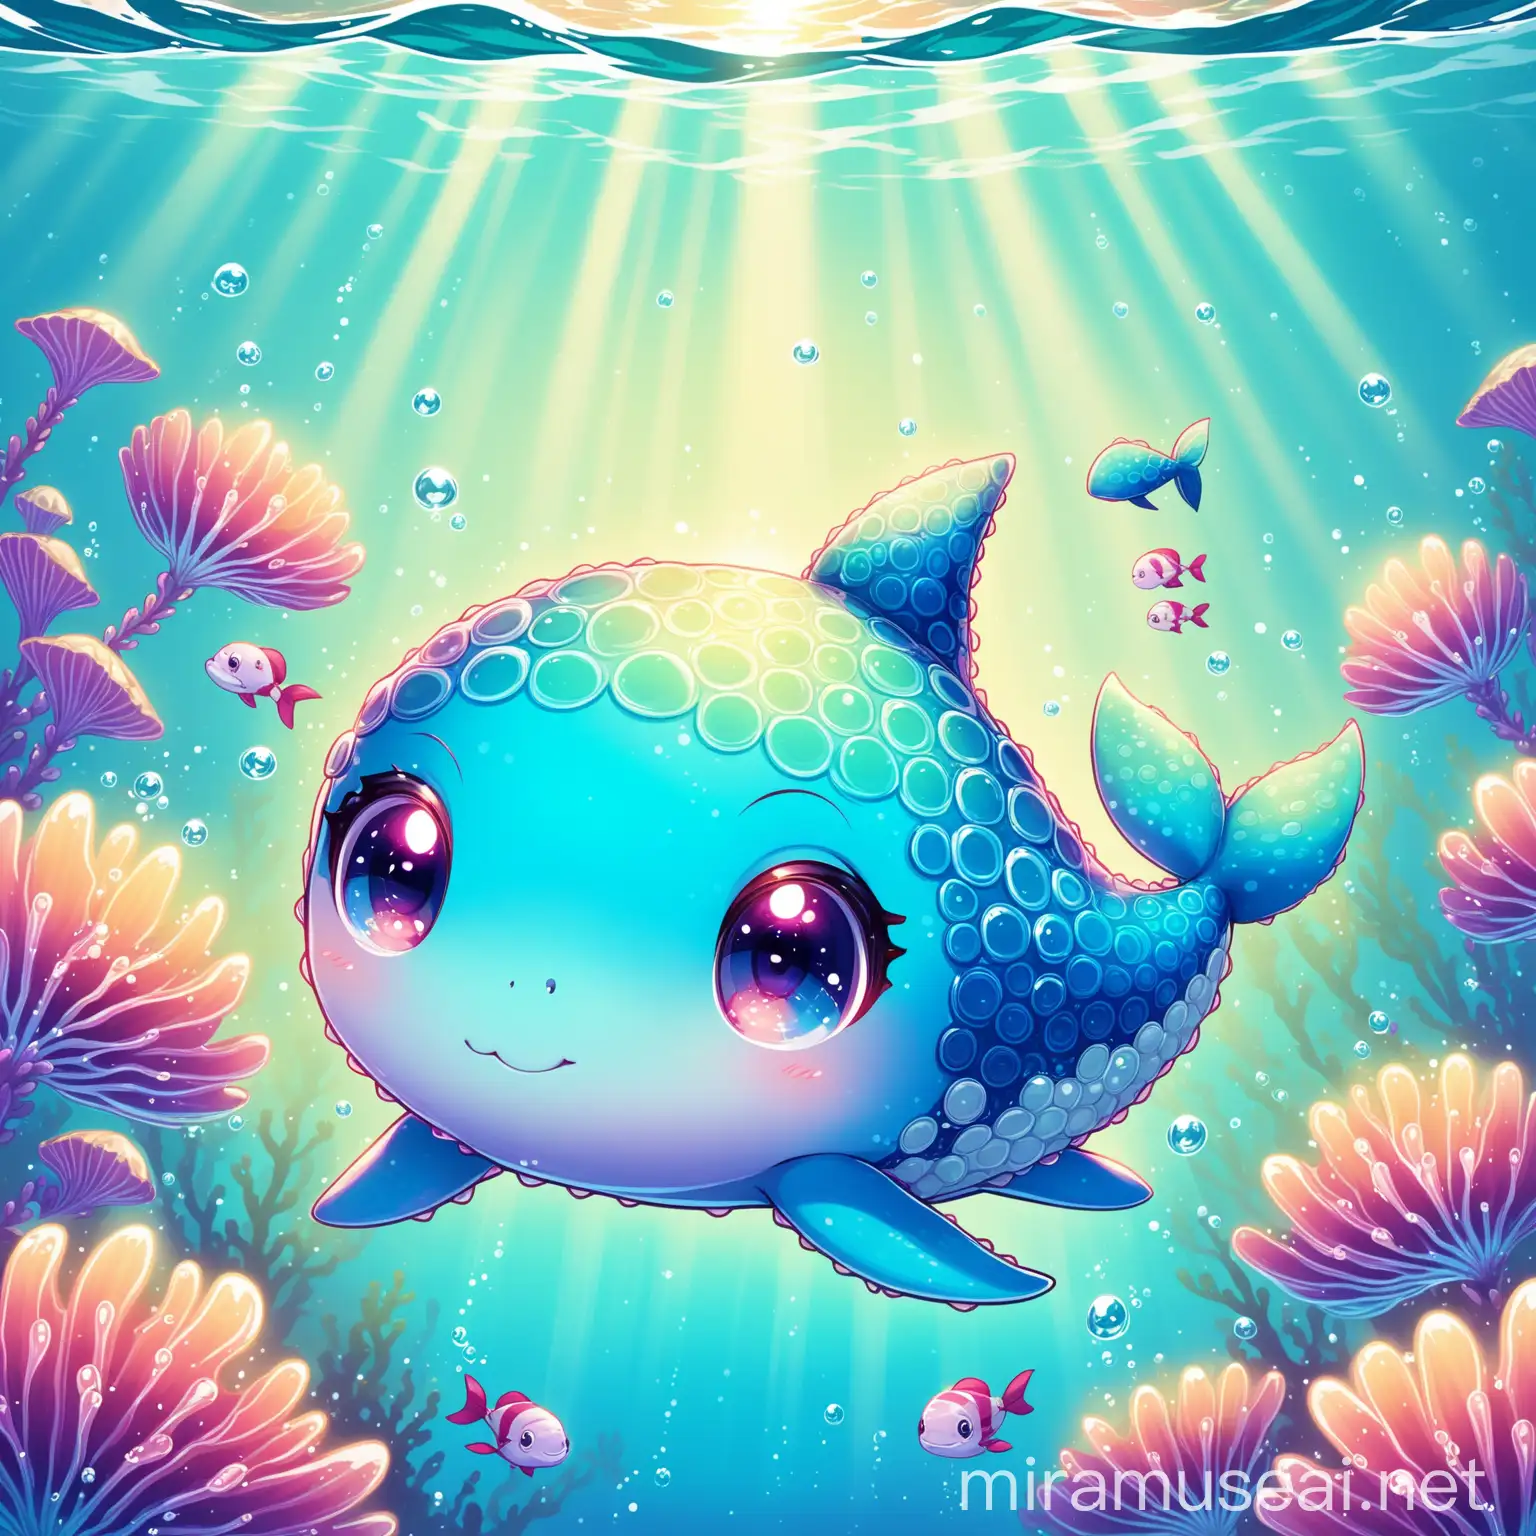 mythical cute sea creature in water